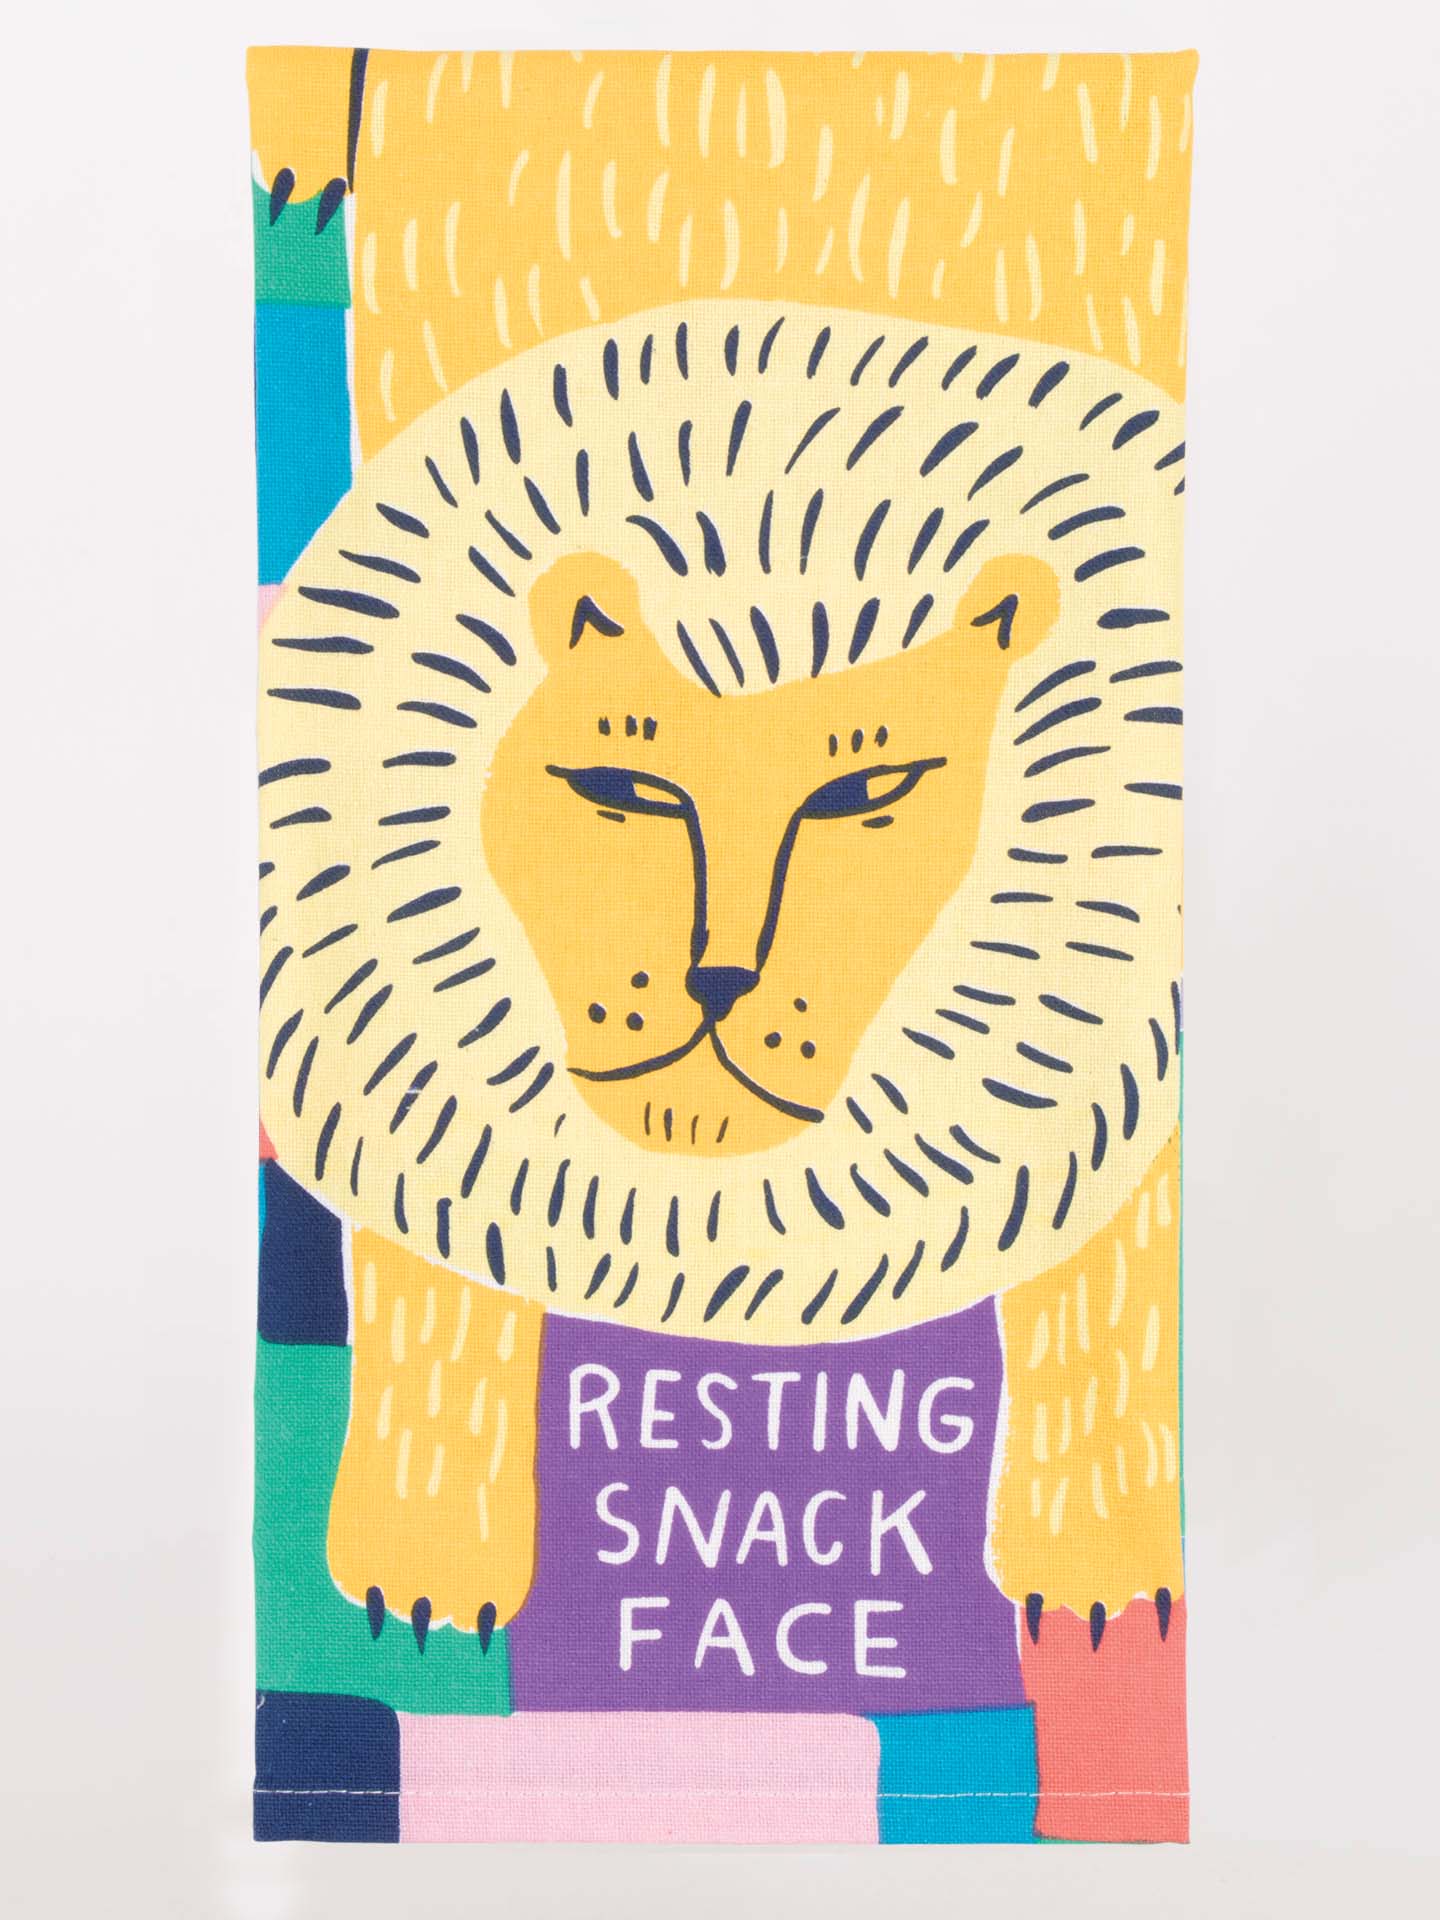 Details about   Blue Q "Resting Snack Face" Dish Towel